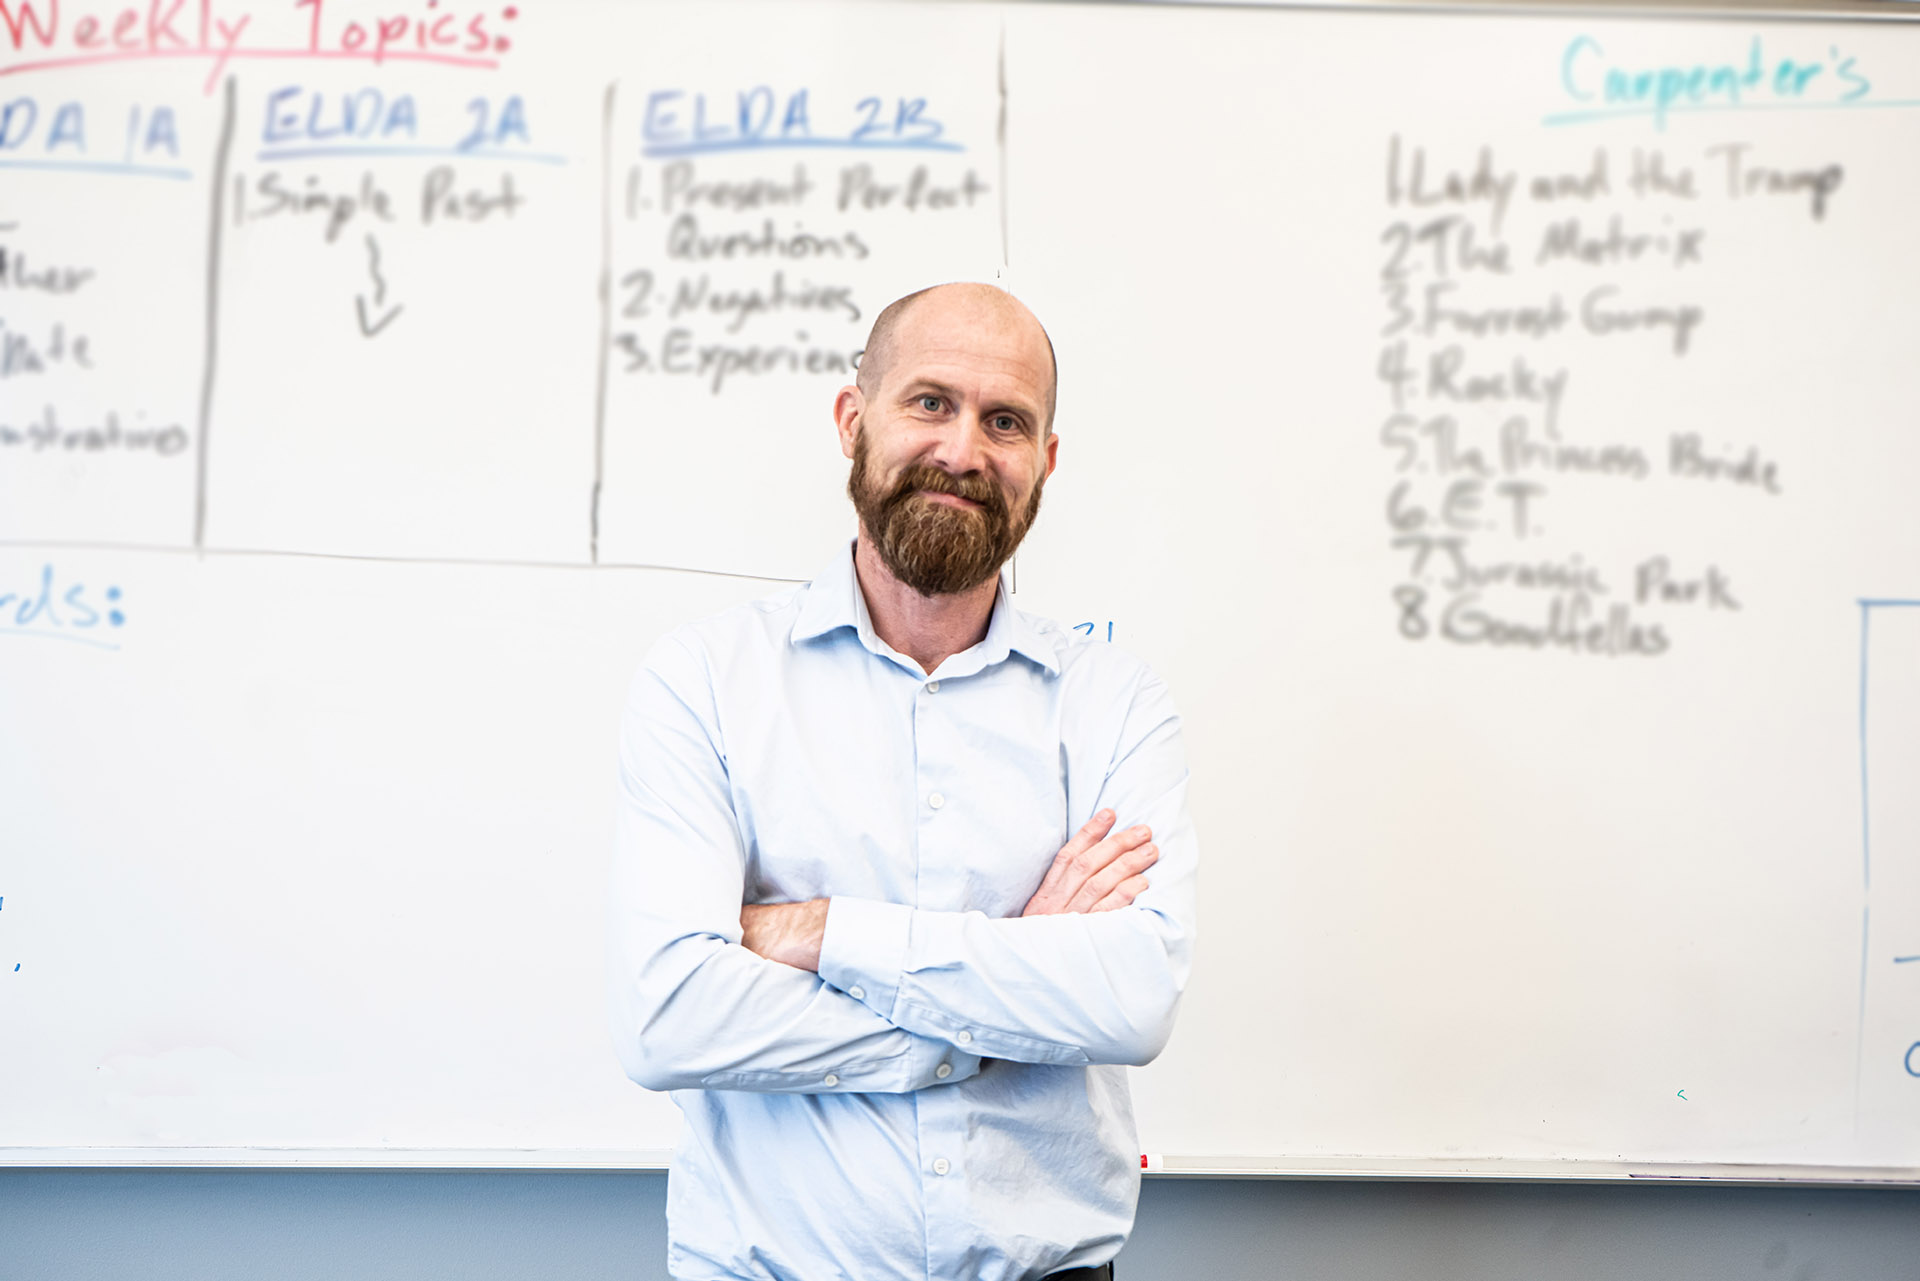 Person with a beard wearing a button up shirt and smiling in front of a whiteboard.